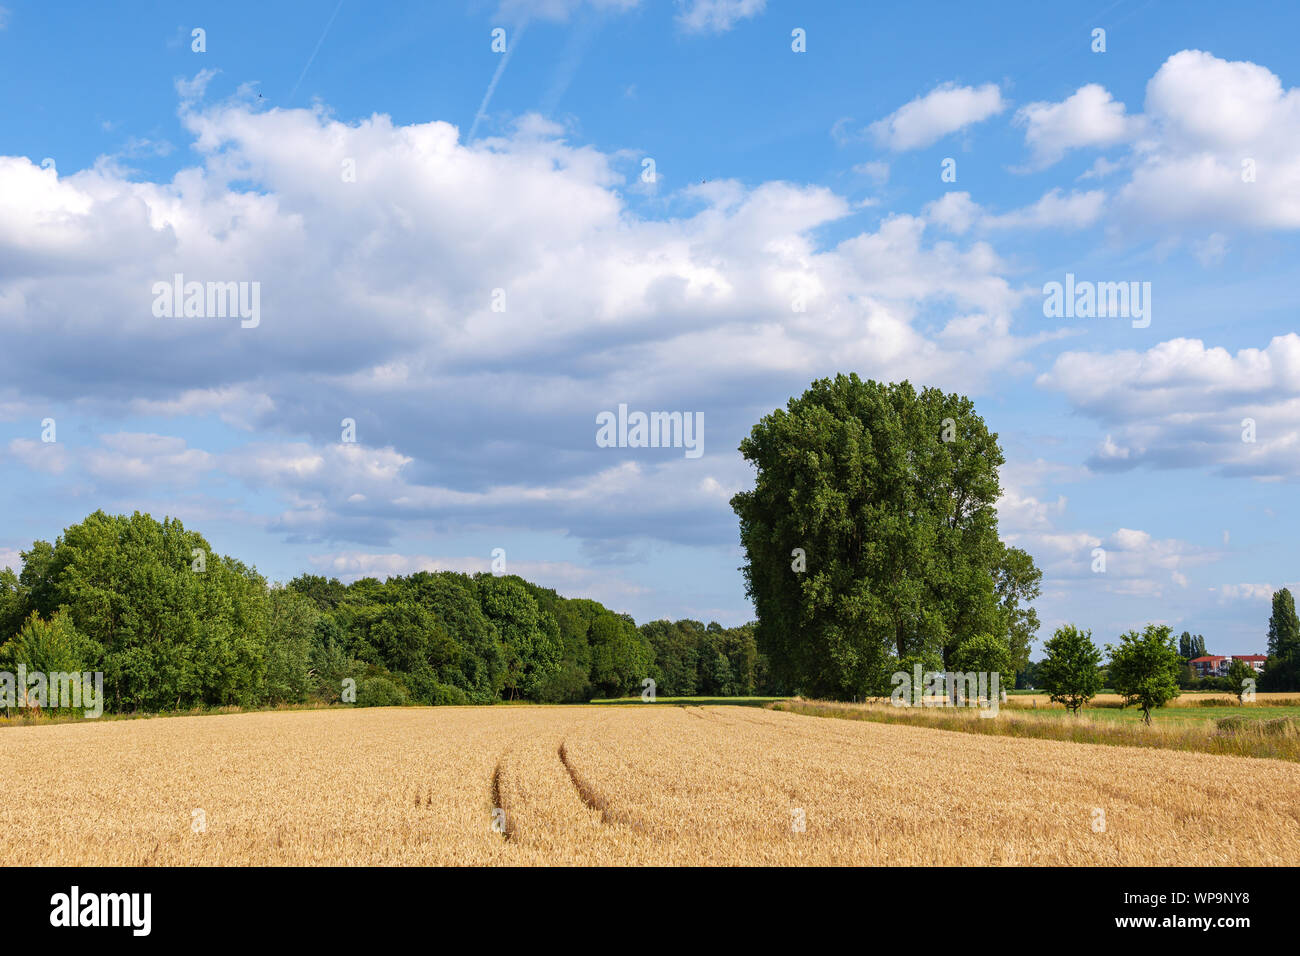 View of golden ears of yellow barley wheat field with the trace of tractor or vehicle wheel mark, in countryside area against dramatic cloud blue sky. Stock Photo